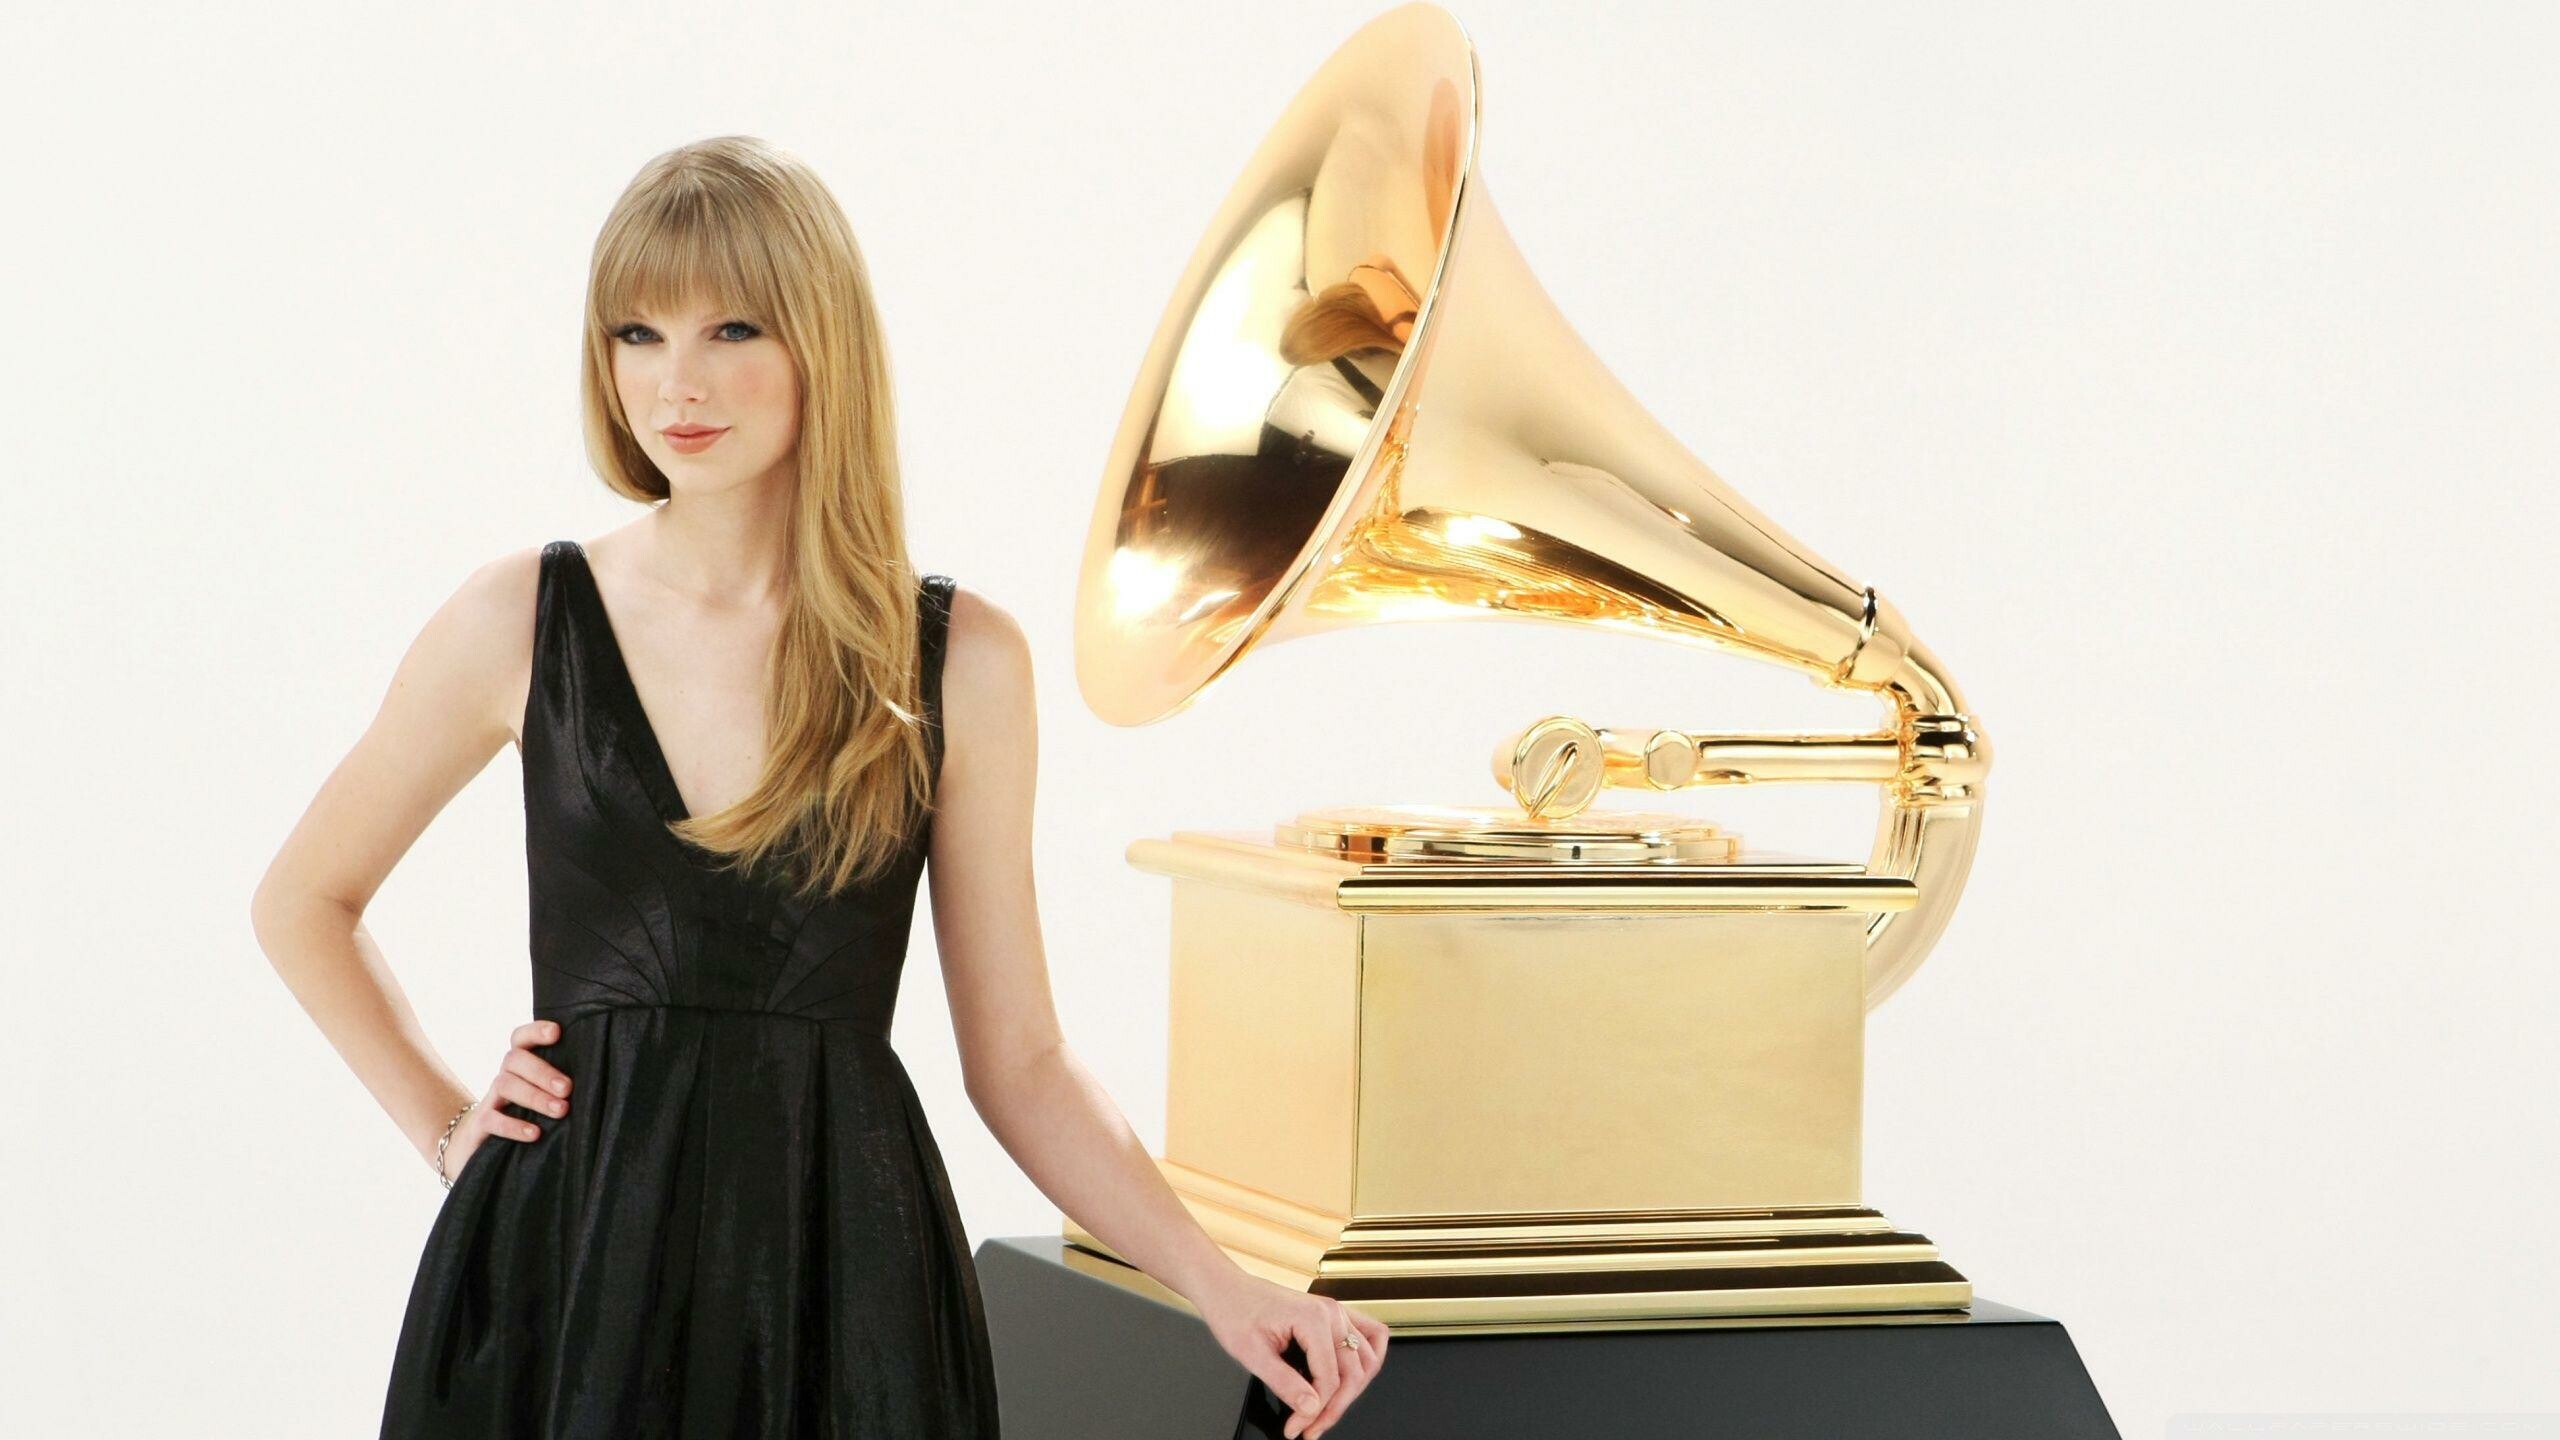 The Grammys, Music's biggest night, Red carpet glamour, Star-studded event, 2560x1440 HD Desktop